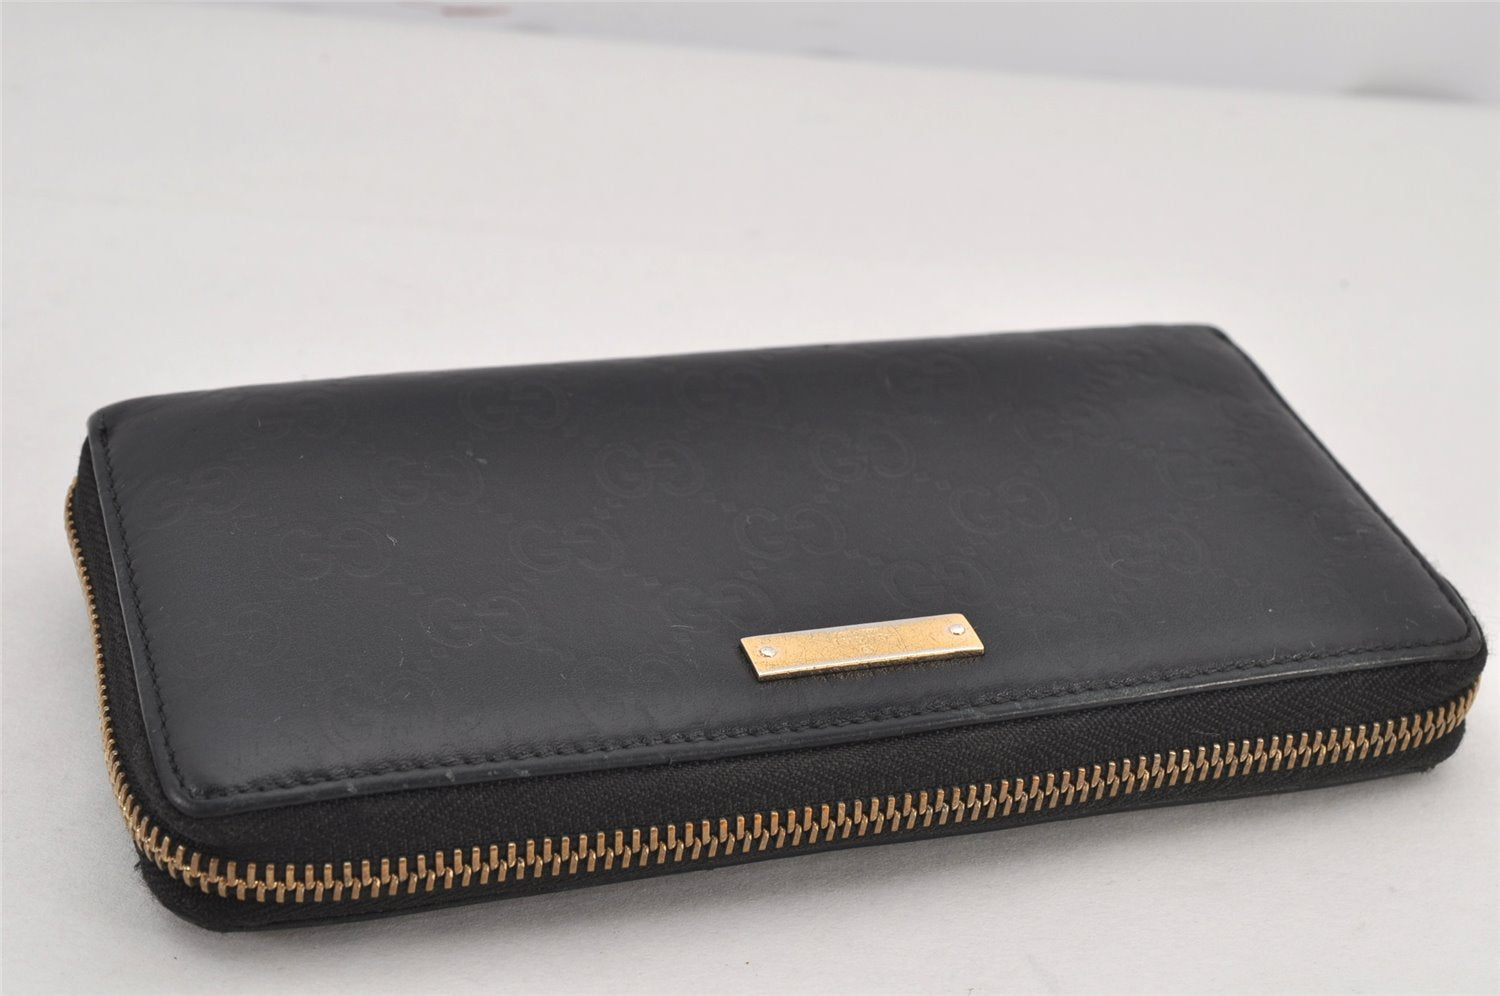 Authentic GUCCI Guccissima GG Leather Long Wallet Purse 112724 Black 8008J